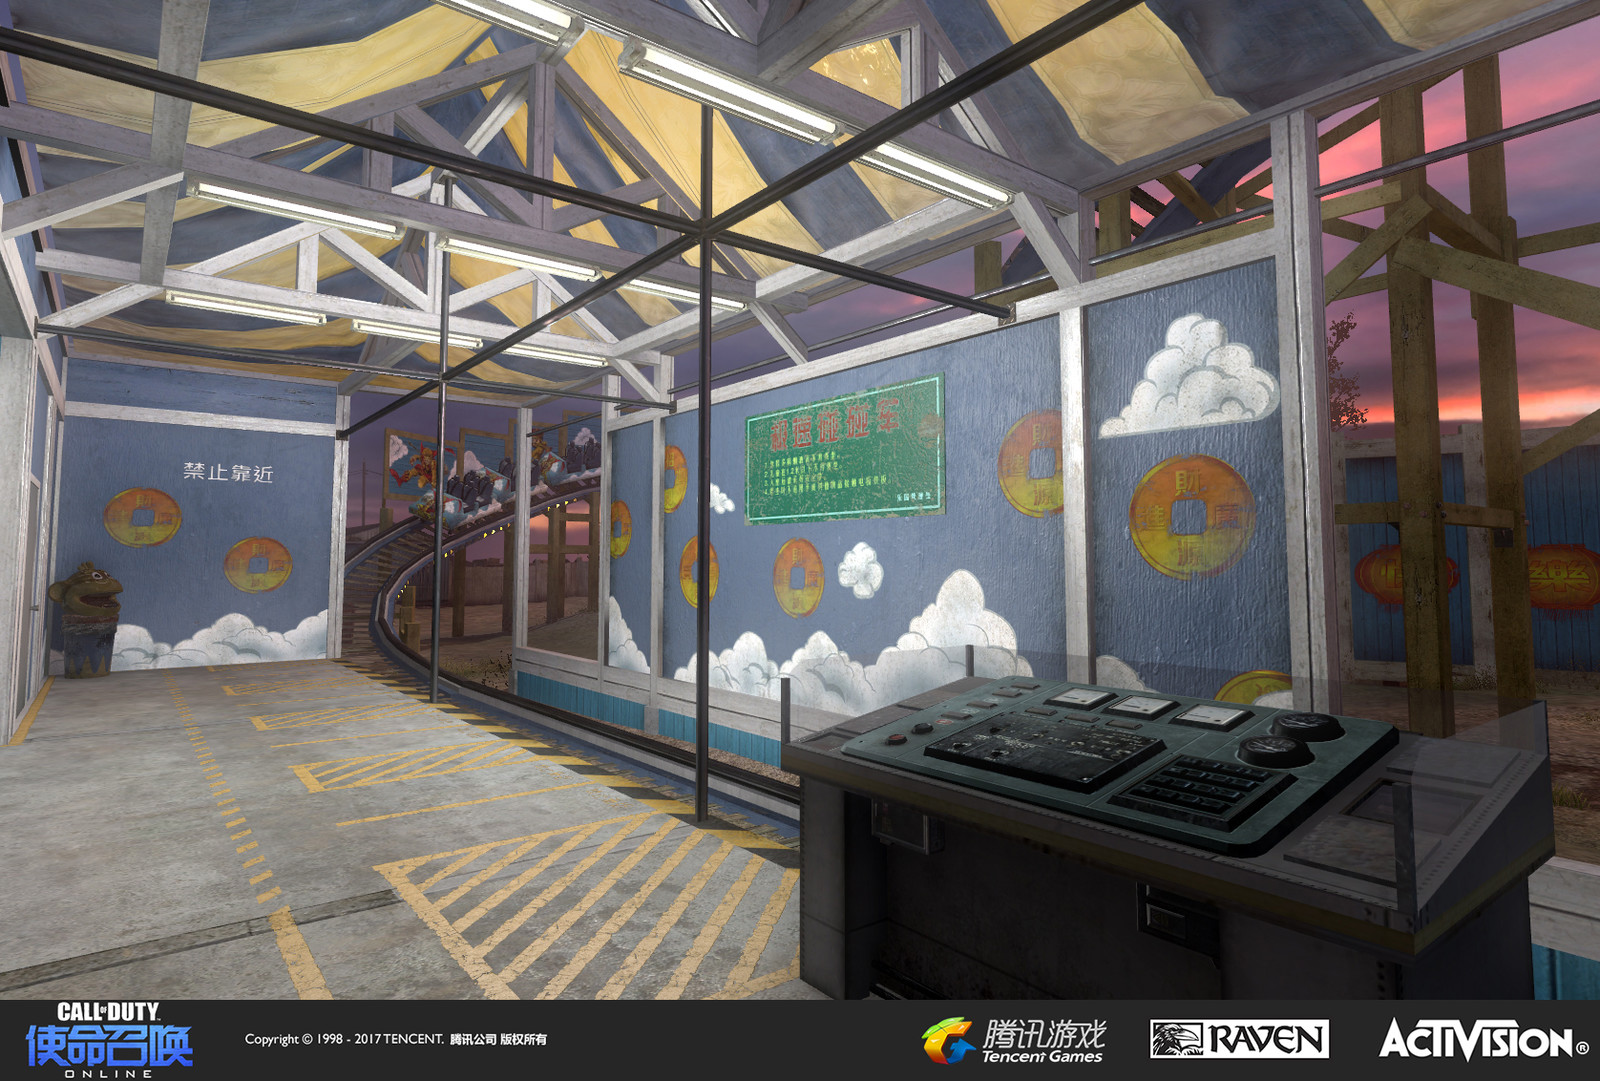 Carnival: The interior of the roller coaster loading station. I modified the old geo, re-textured, and re-themed the ride to comply with the Monkey King theme. I also created a control console with added set dress.